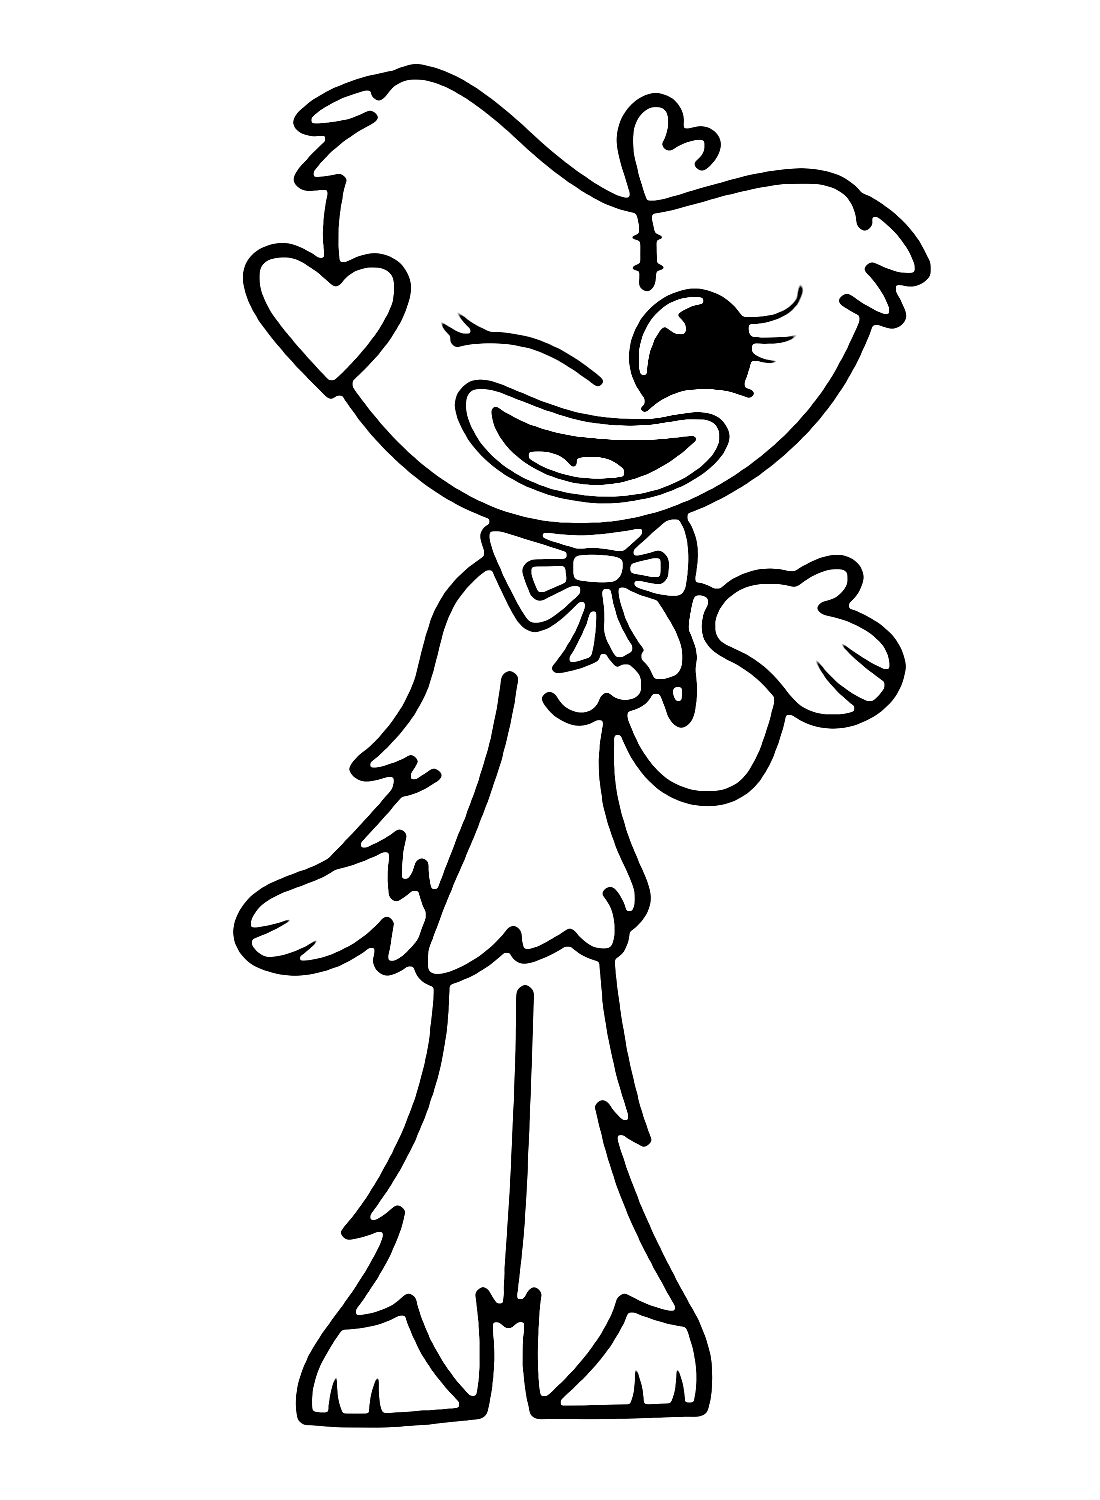 Adorable Kissy Missy Coloring Page